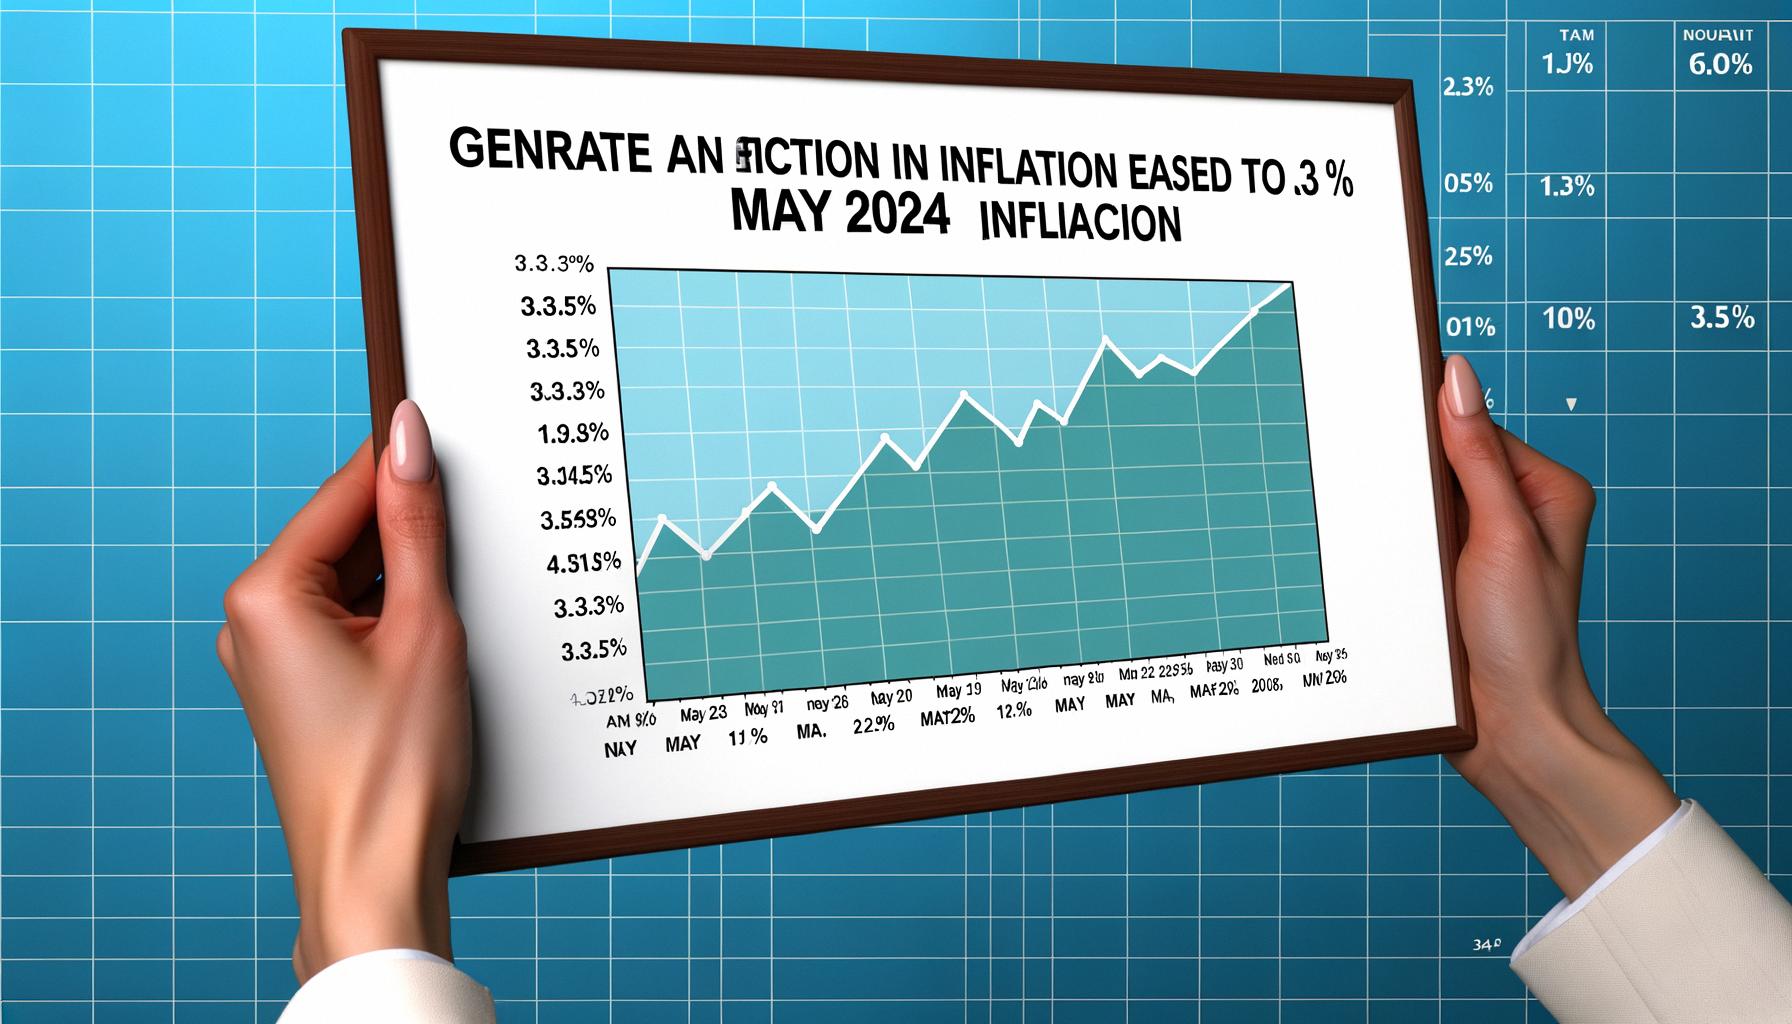 Inflation eased to 3.3% in May 2024